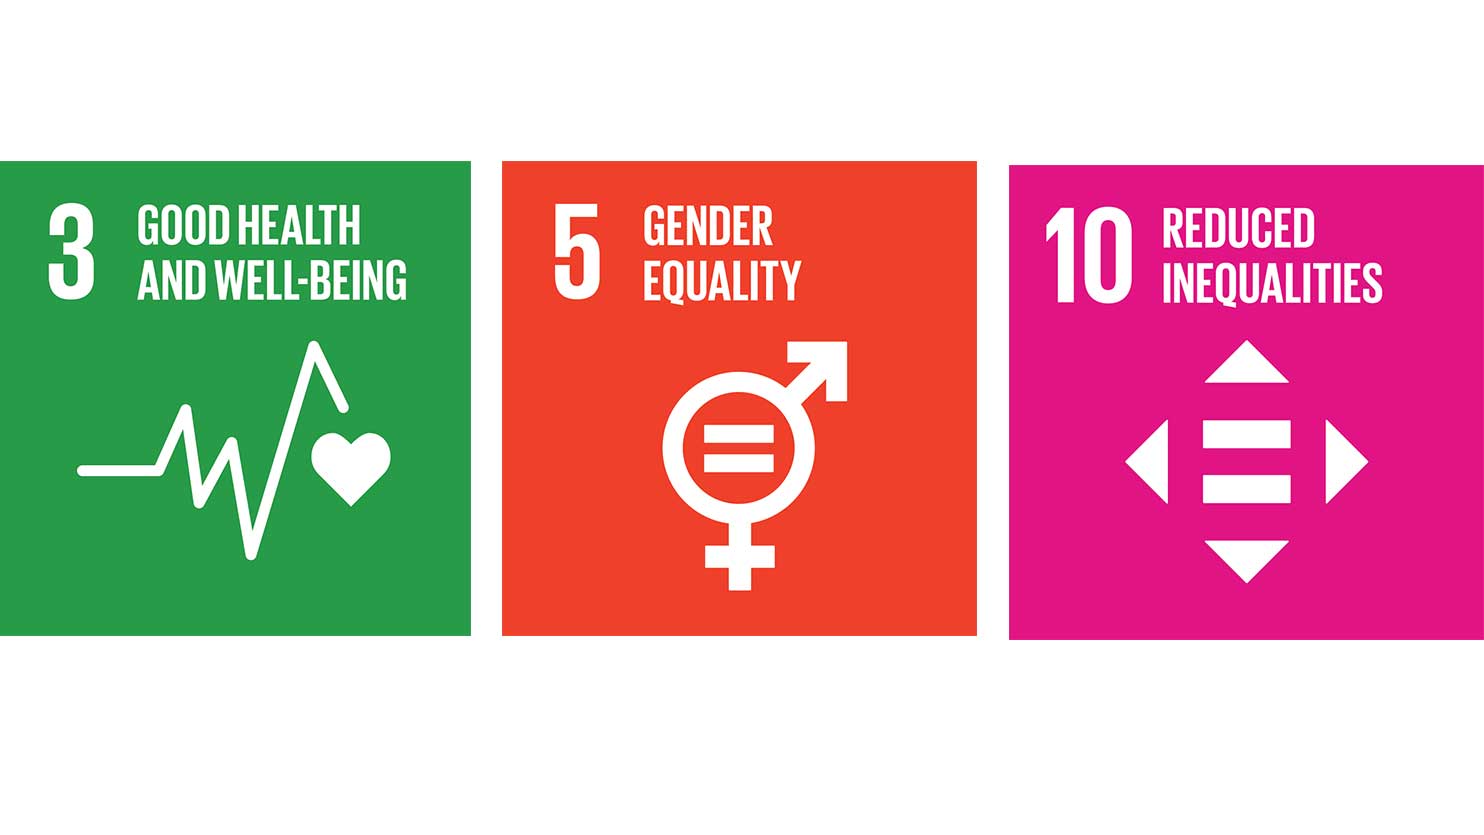 The three sustainable development goals of Group Care for Mothers and their Partners: Good health and well-being, gender equality and reduced inequalities